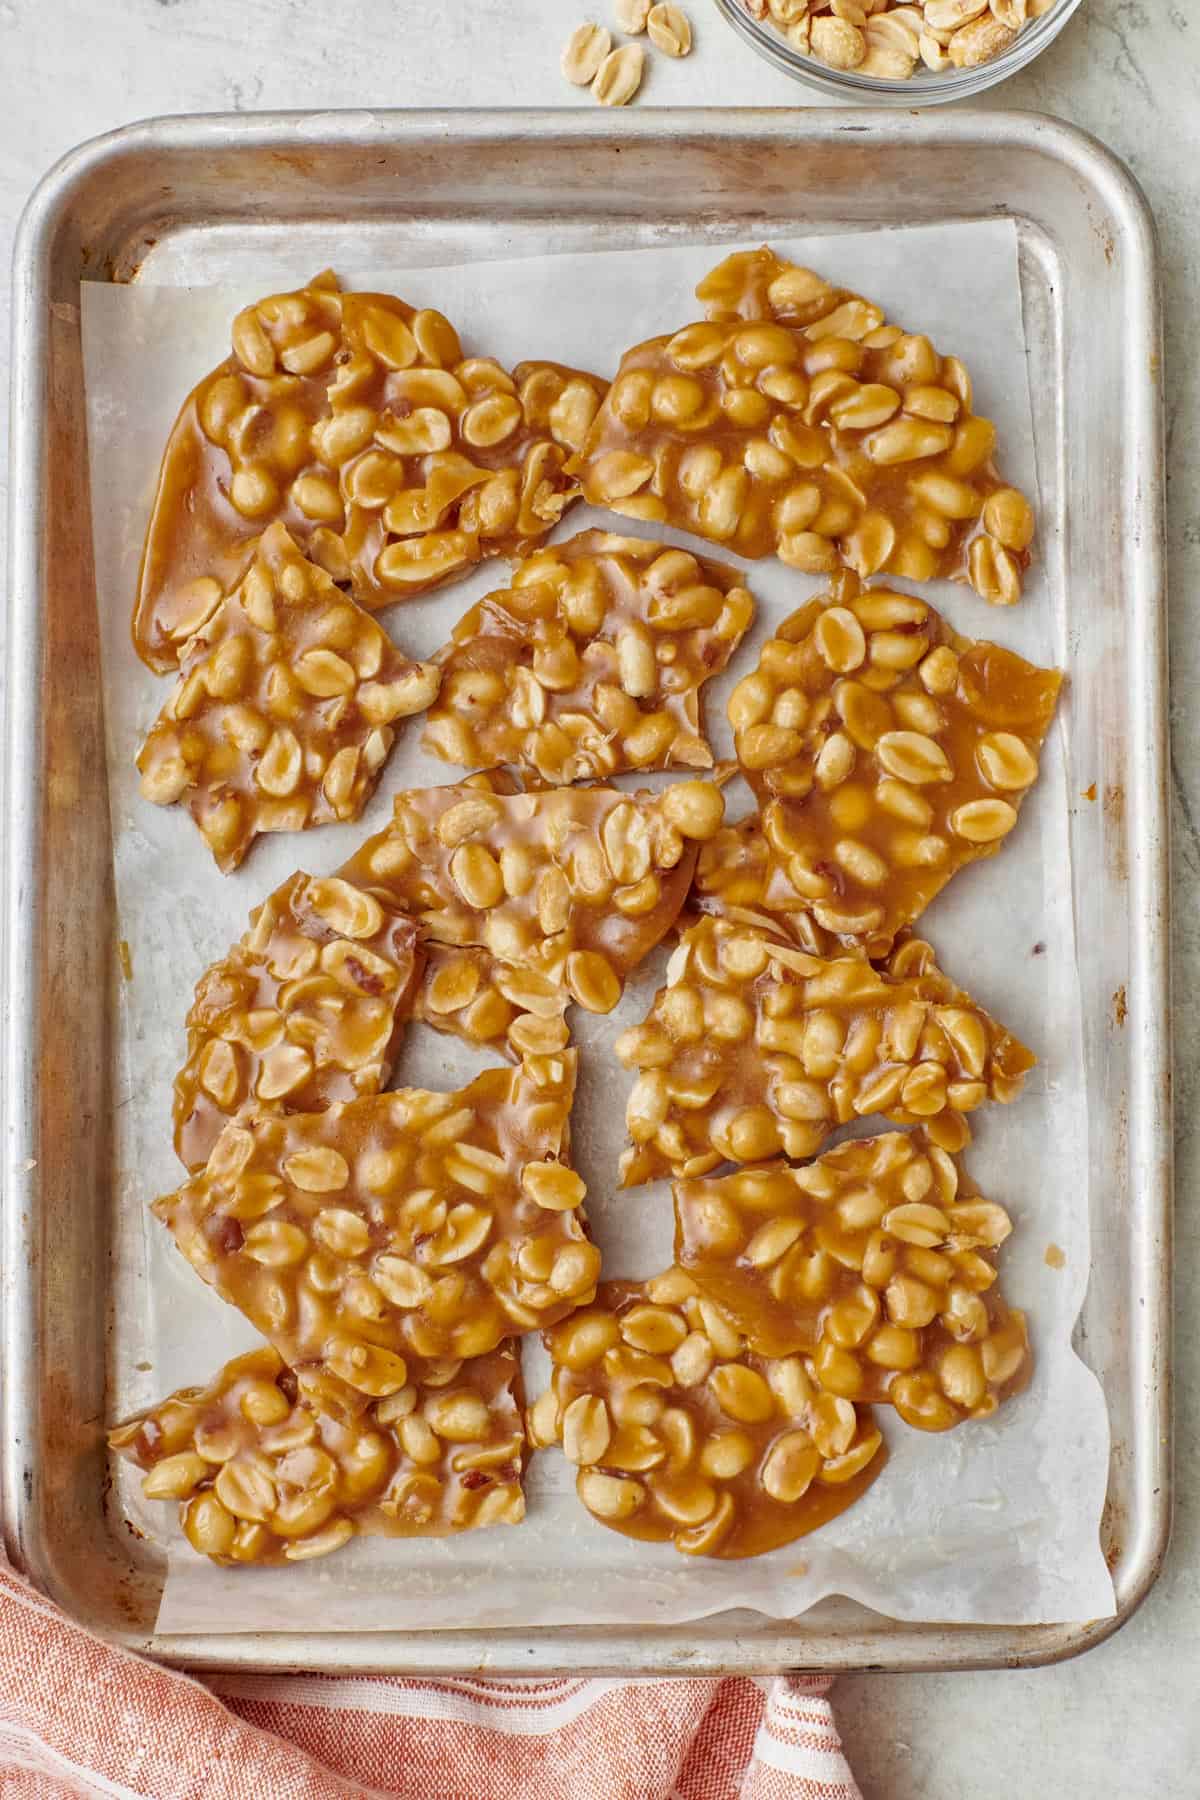 Homemade peanut brittle on a parchment lined sheet pan.